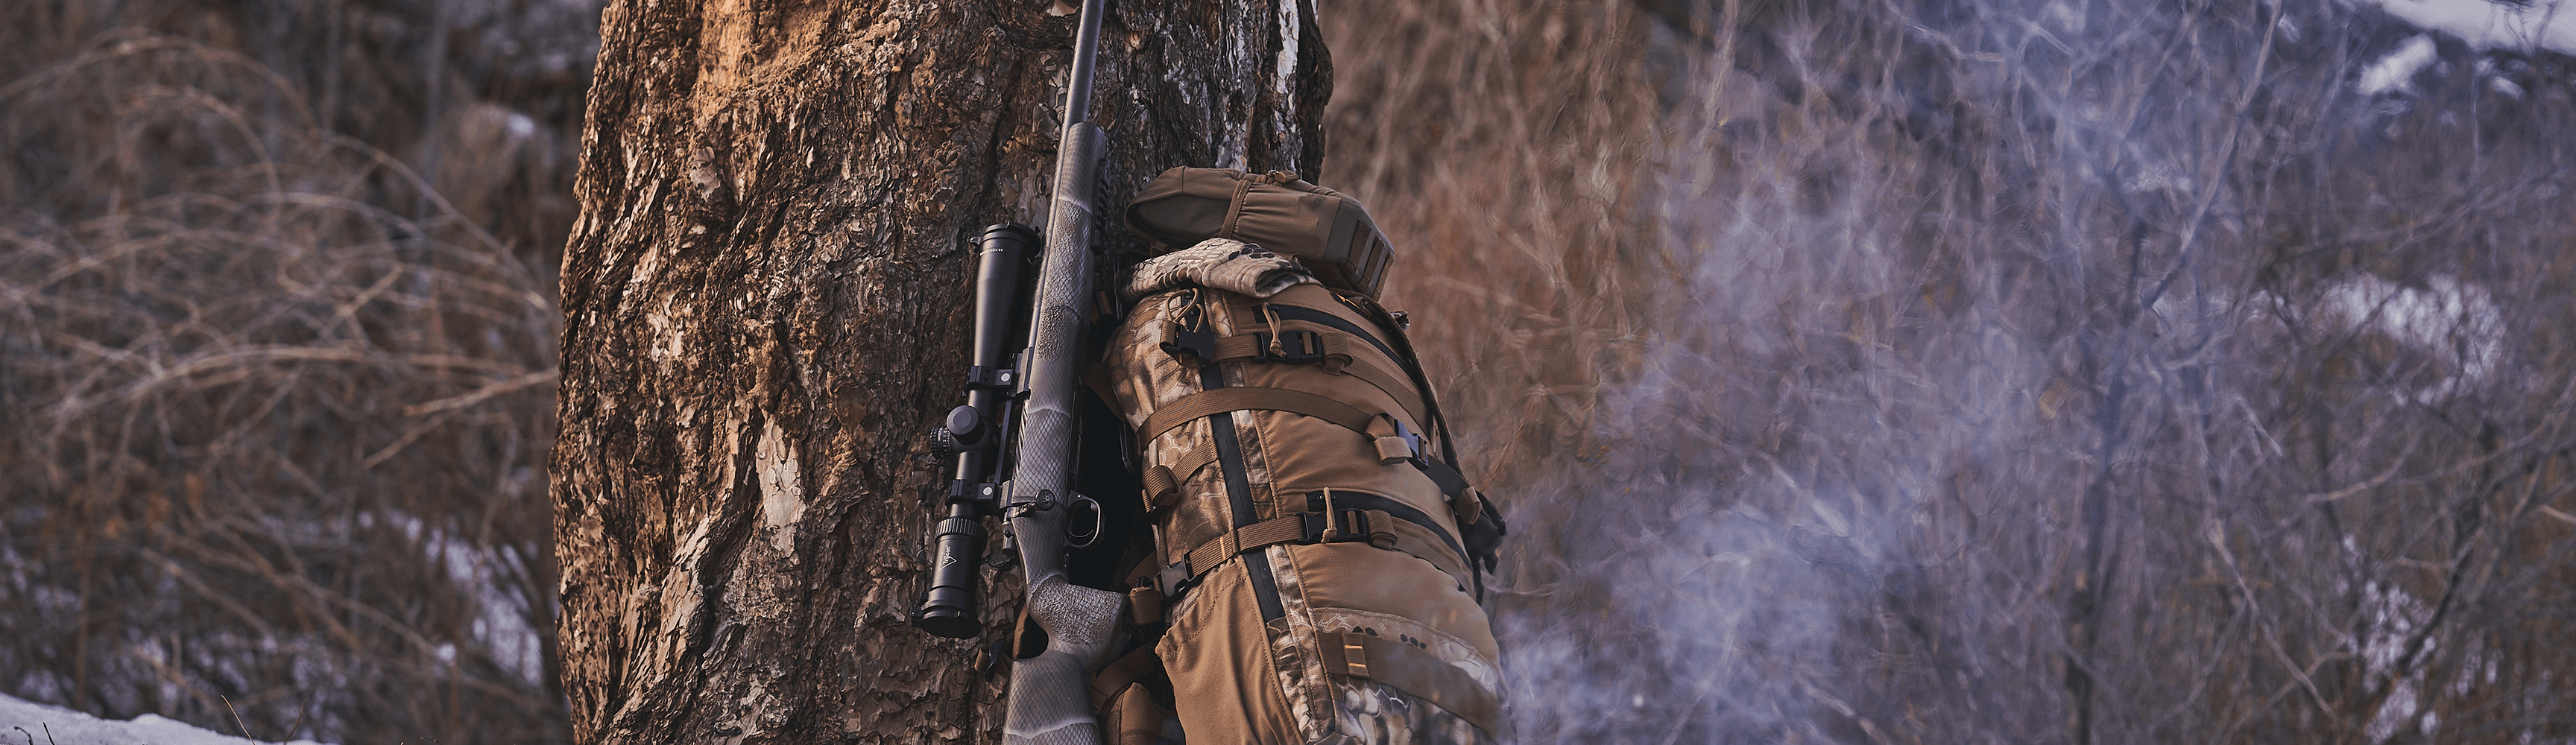 The Ultimate Guide to Organizing Your Hunting Backpack - Kryptek